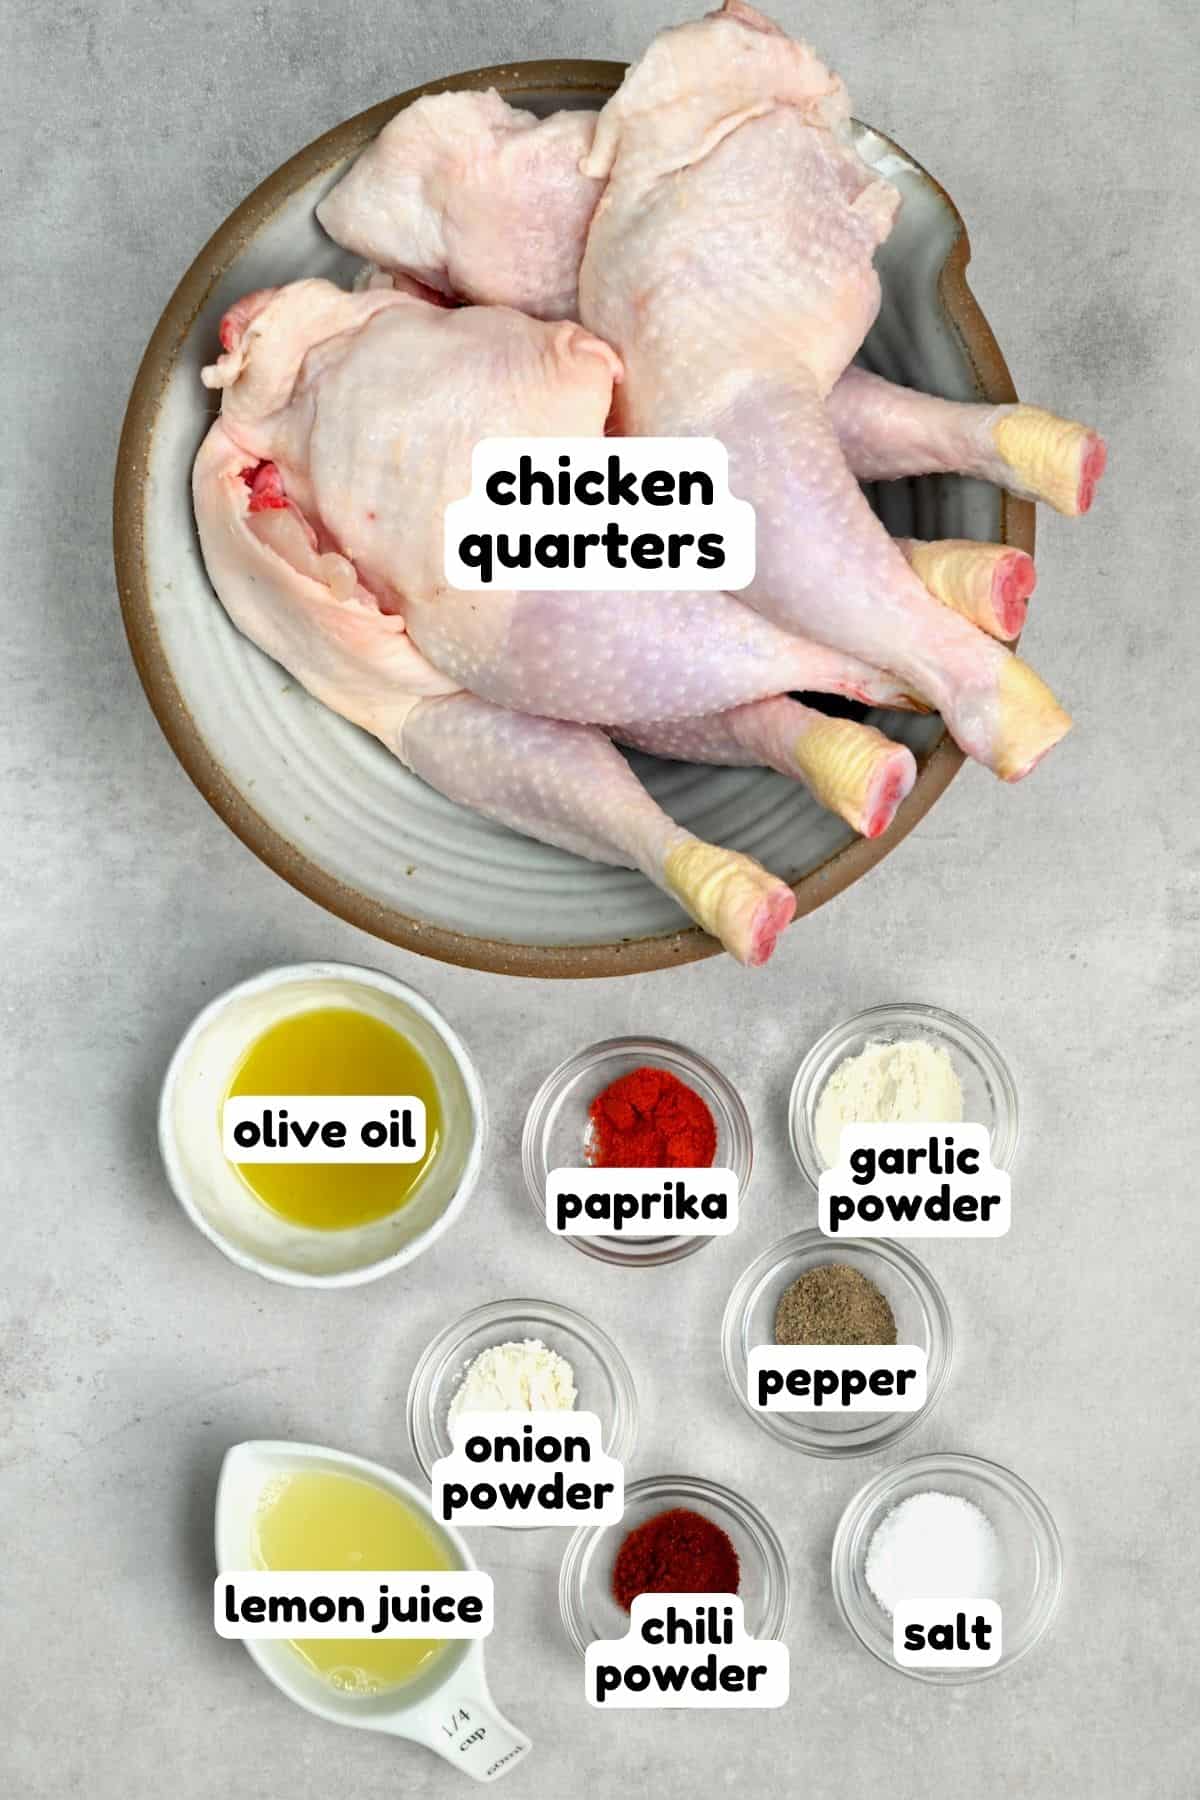 Ingredients for grilled chicken quarters